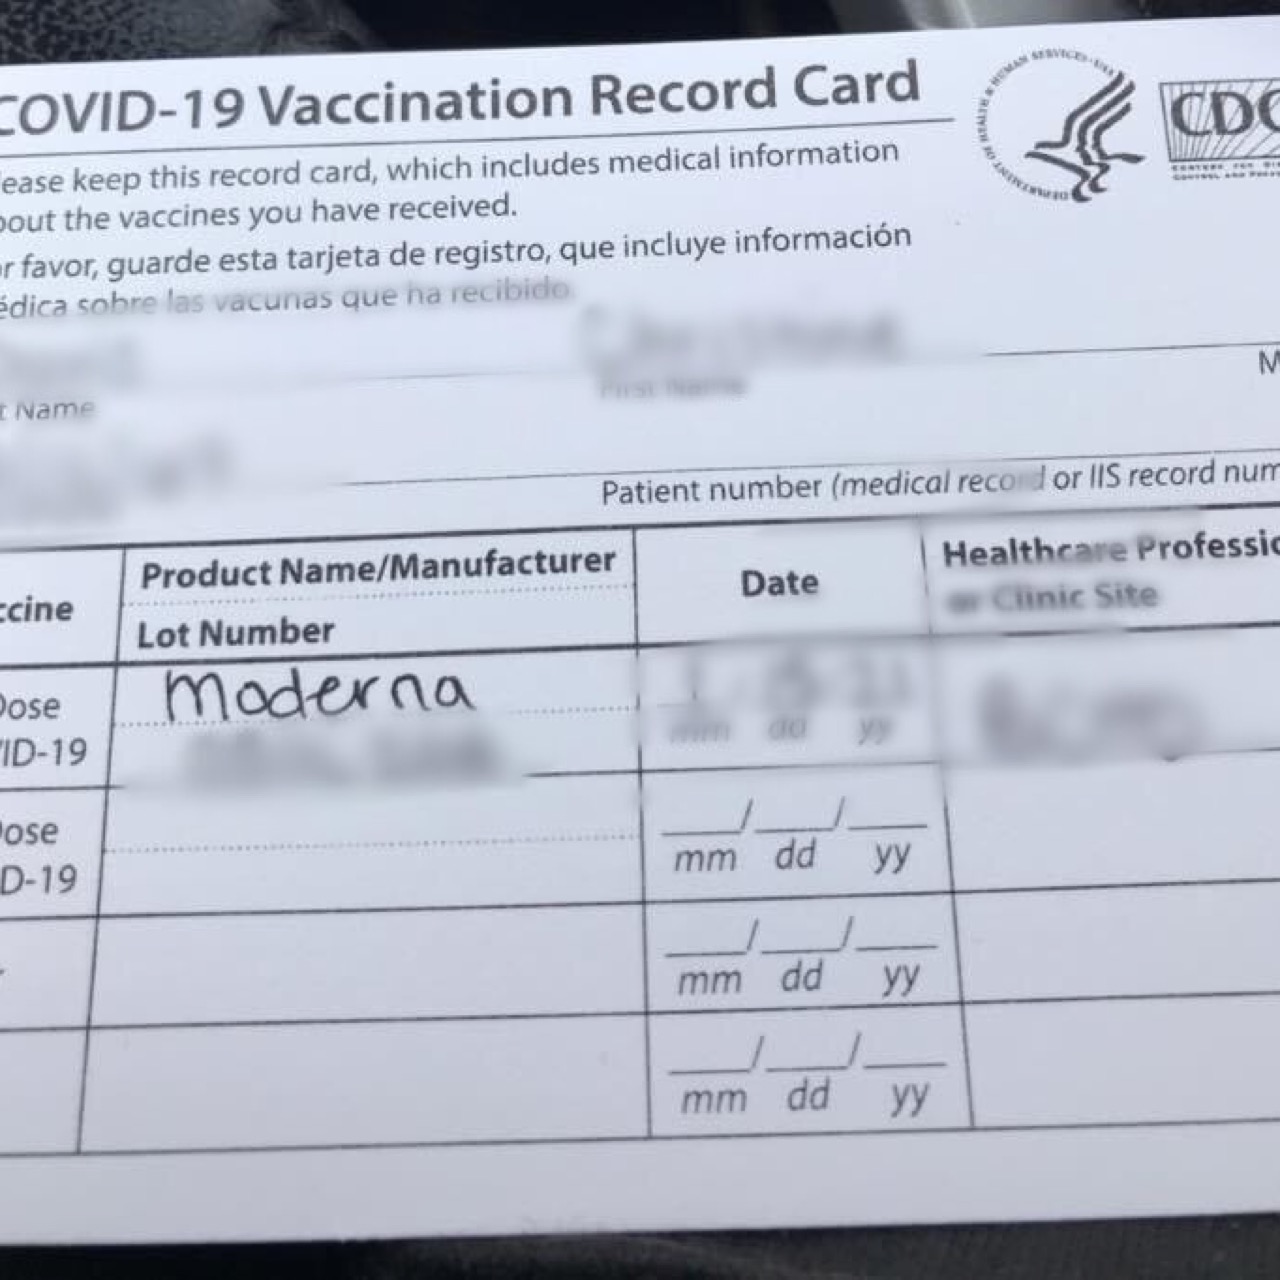 My Experience with the Covid Vaccine